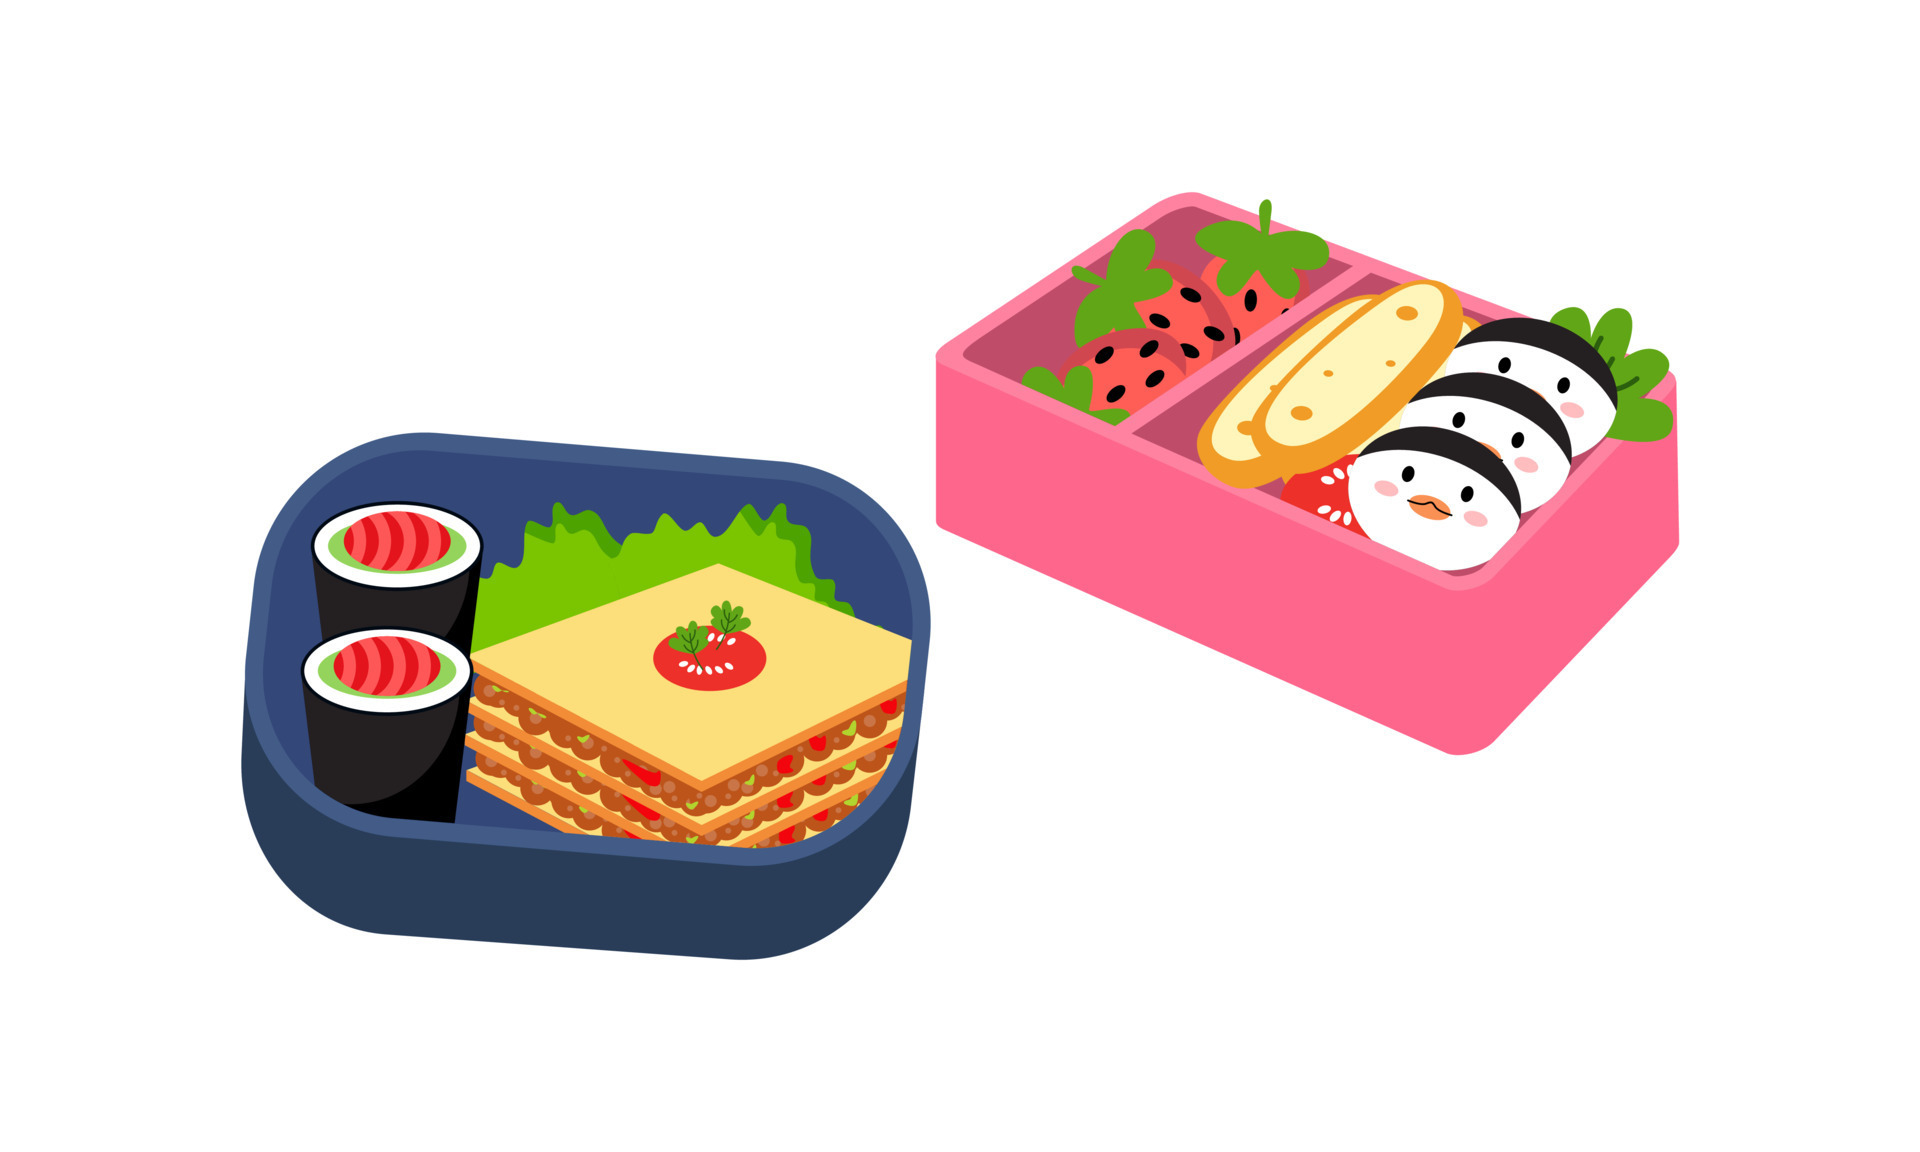 https://static.vecteezy.com/system/resources/previews/023/960/341/original/bento-box-logo-japanese-lunch-box-various-traditional-asian-food-cartoon-style-vector.jpg